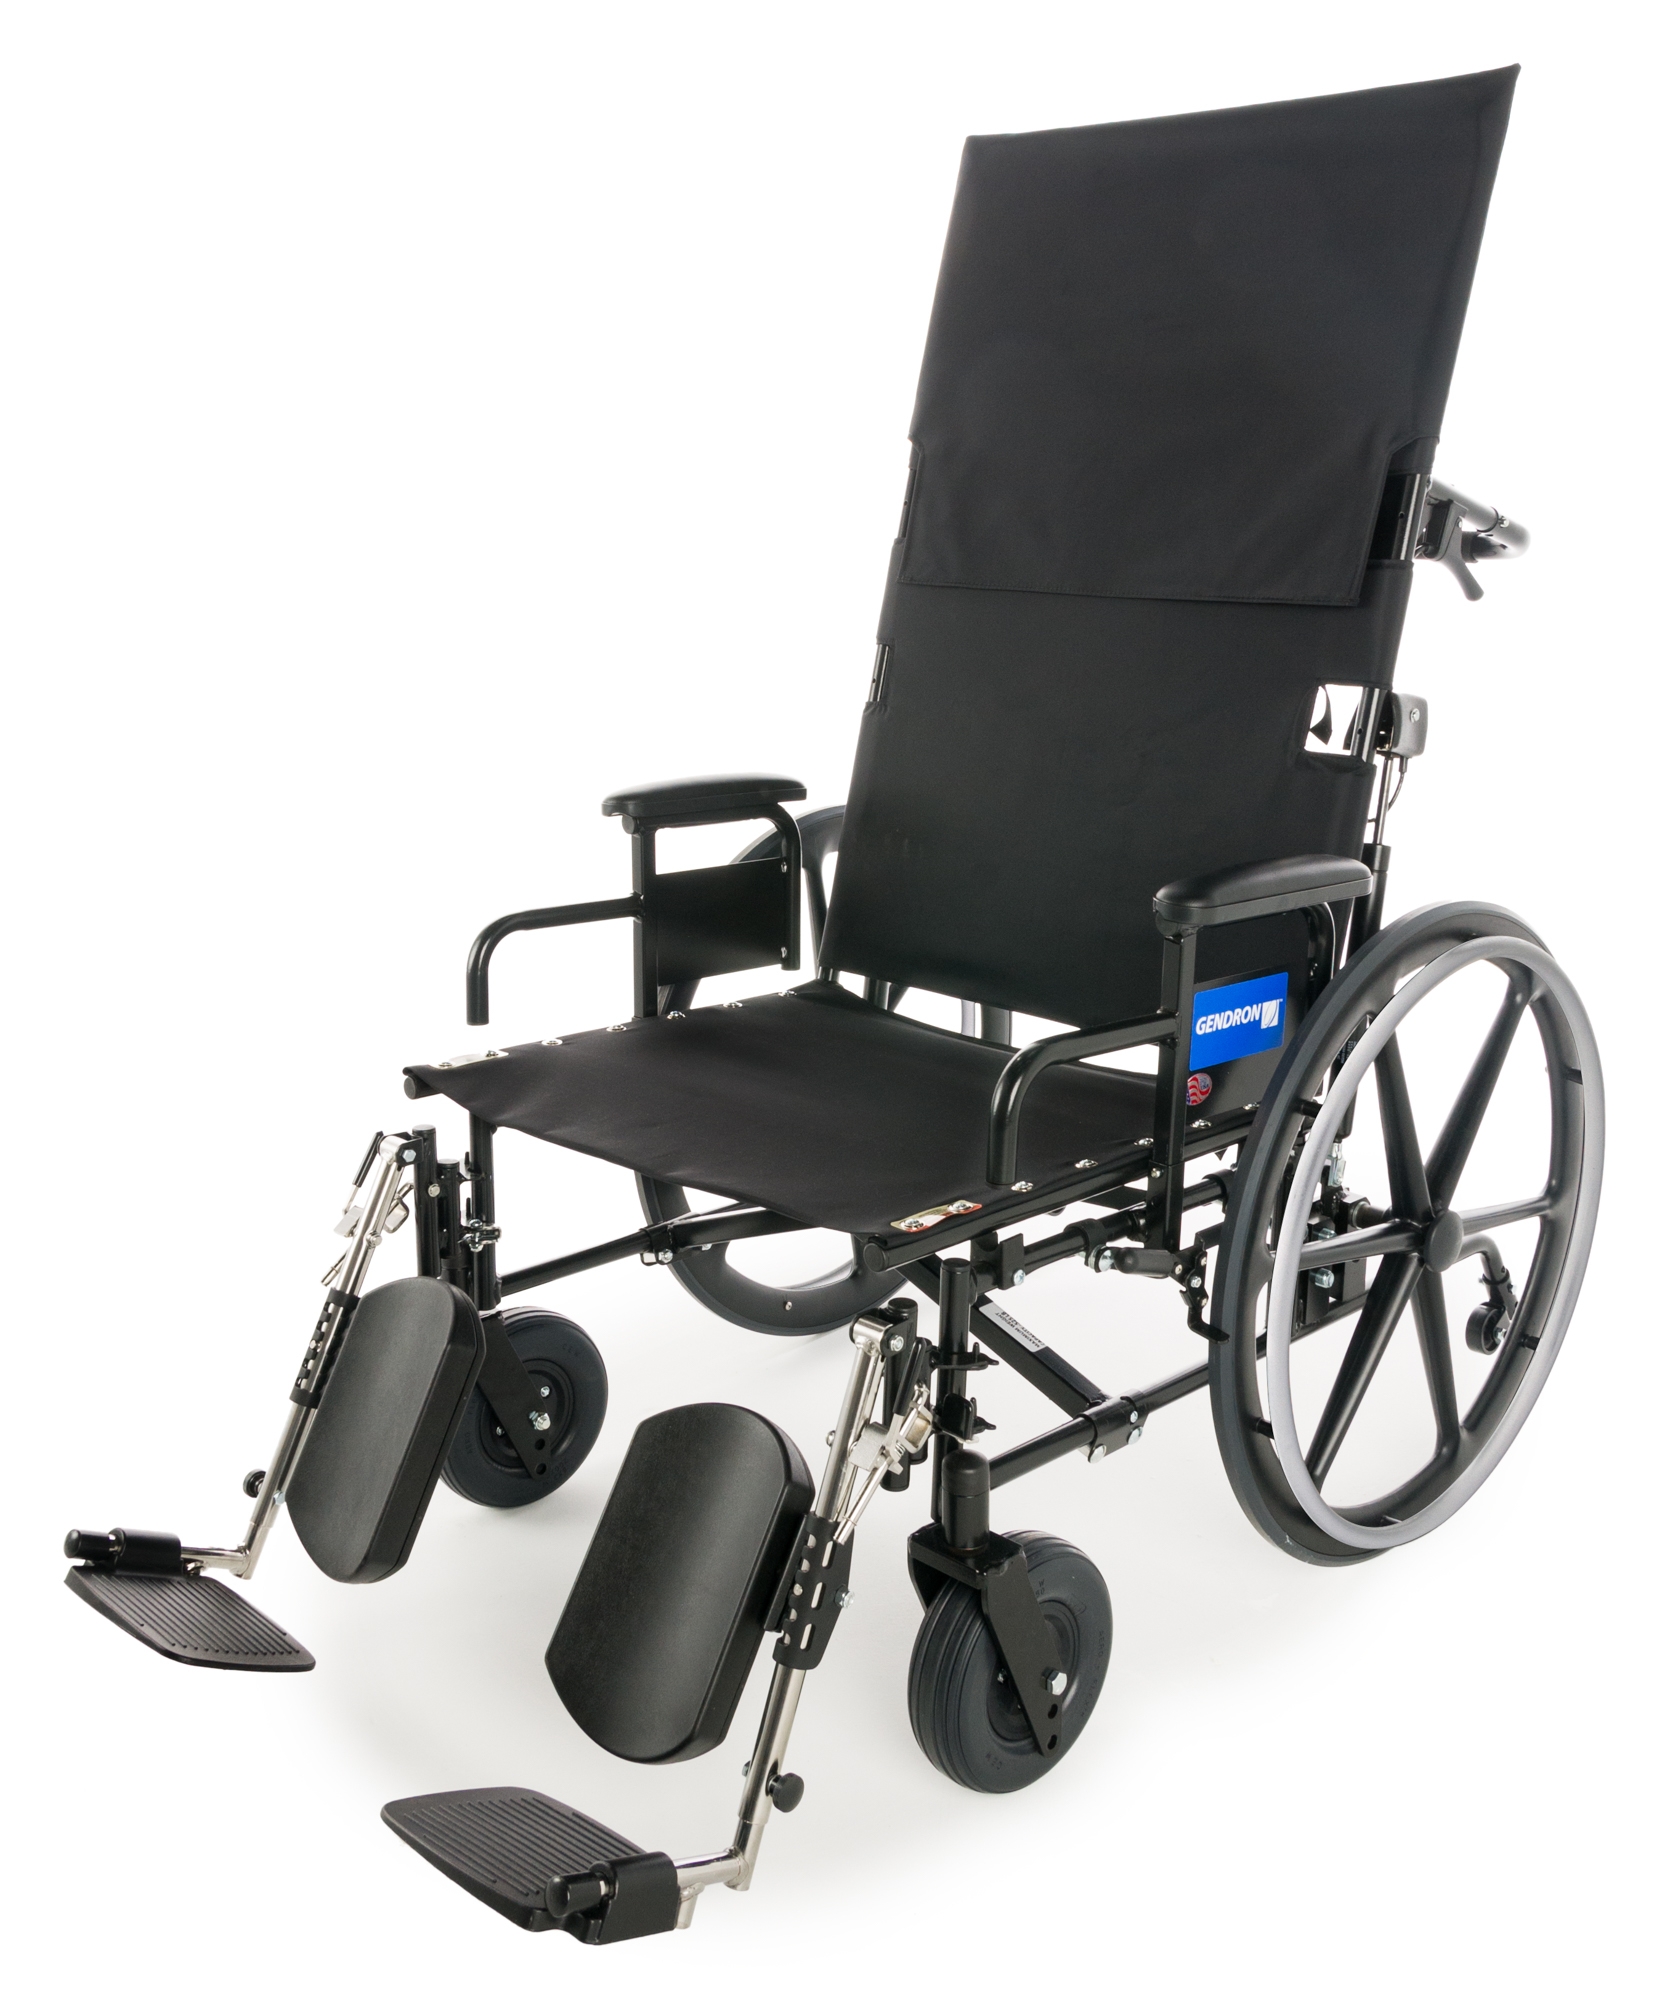 Reclining Wheelchairs Products, Supplies and Equipment